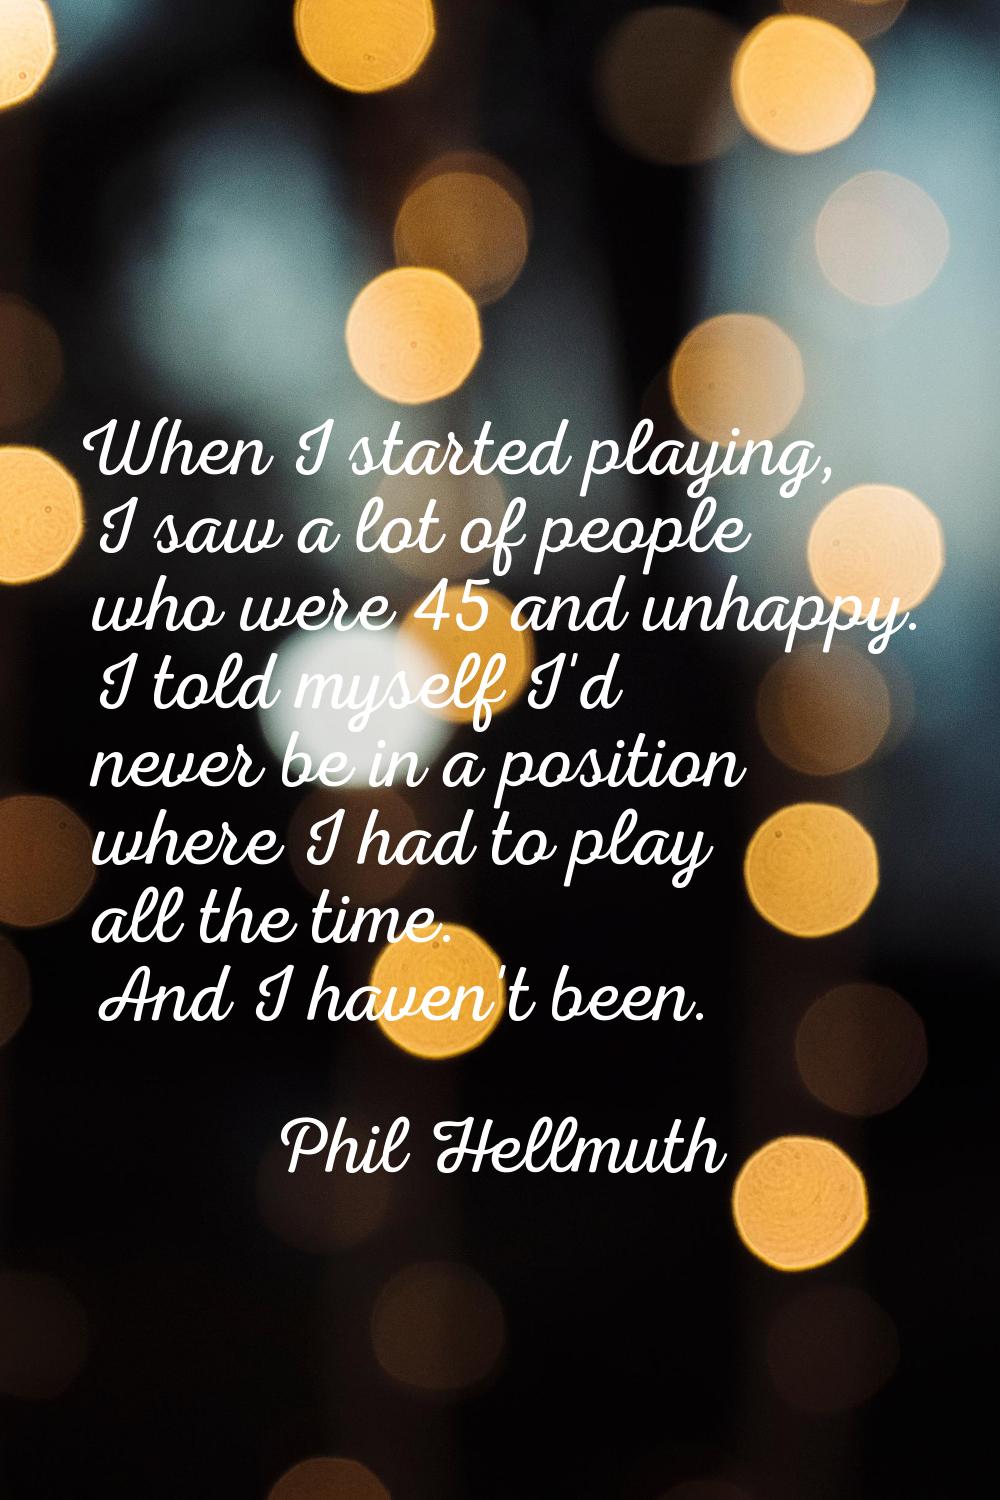 When I started playing, I saw a lot of people who were 45 and unhappy. I told myself I'd never be i